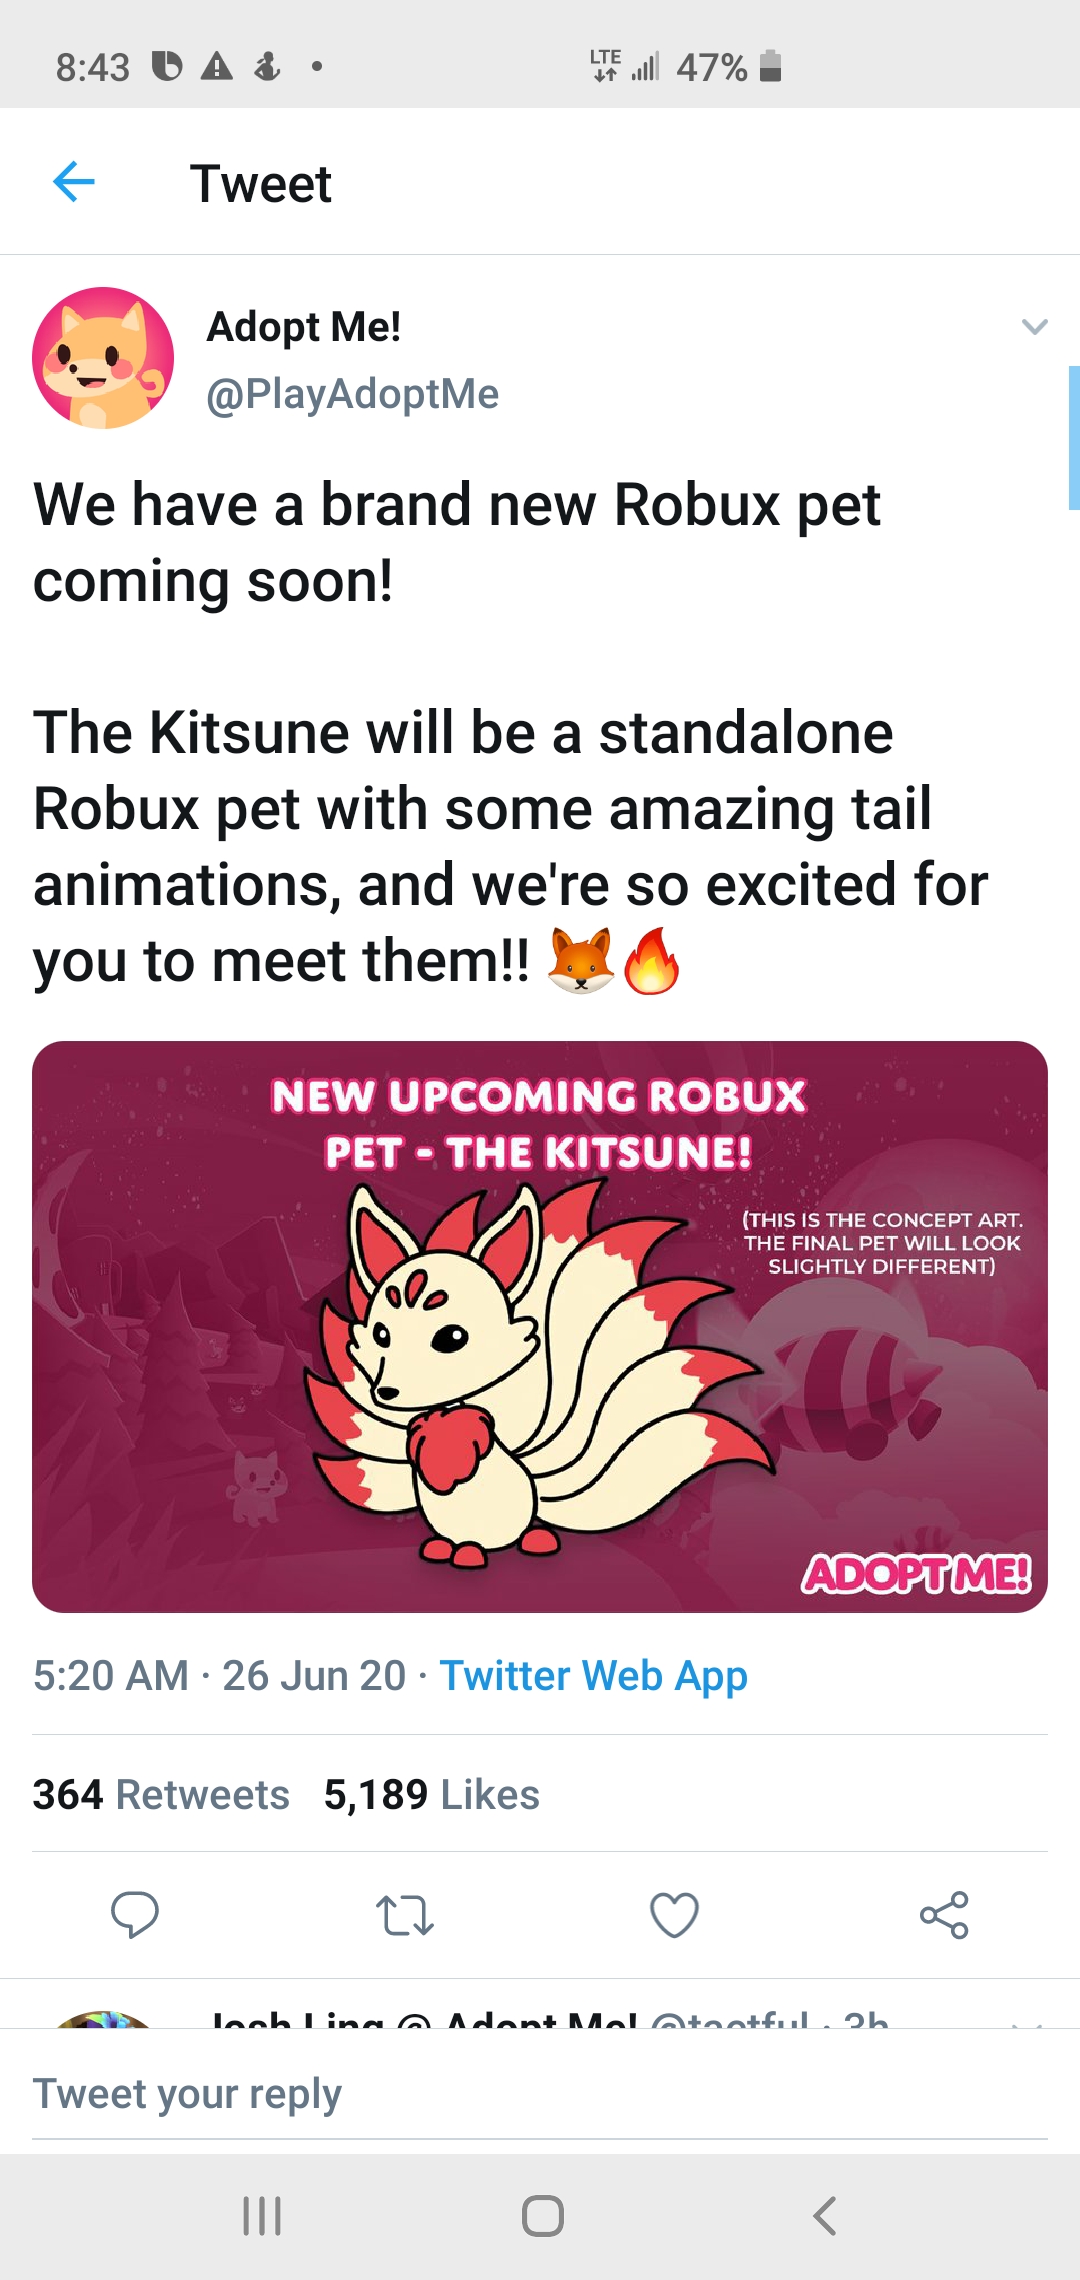 How Much Do You Think The New Adopt Me Robux Pet Will Cost Fandom - how much does 1000 robux cost